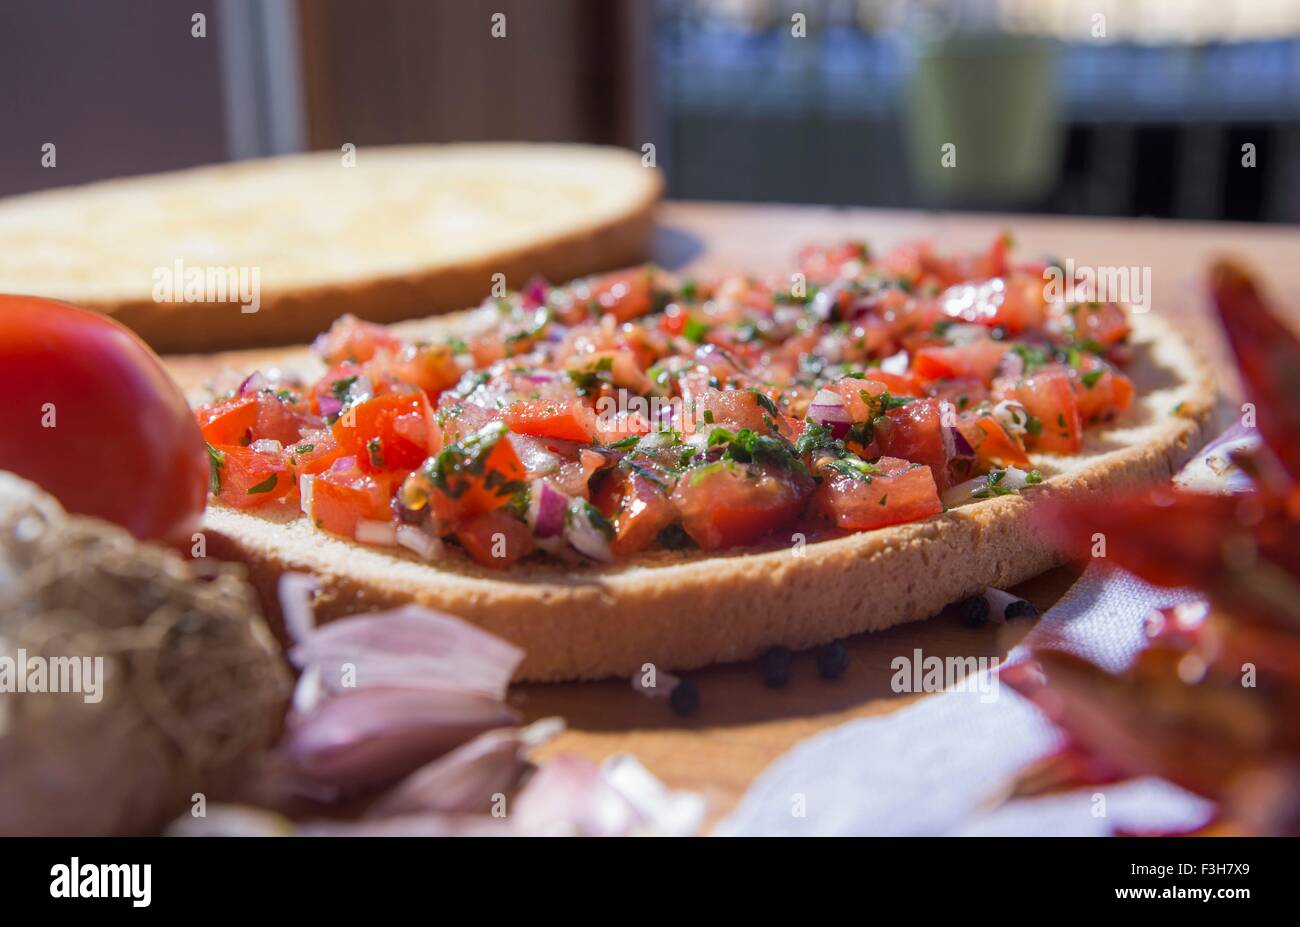 Bread with chopped vegetables and herbs on kitchen counter Stock Photo